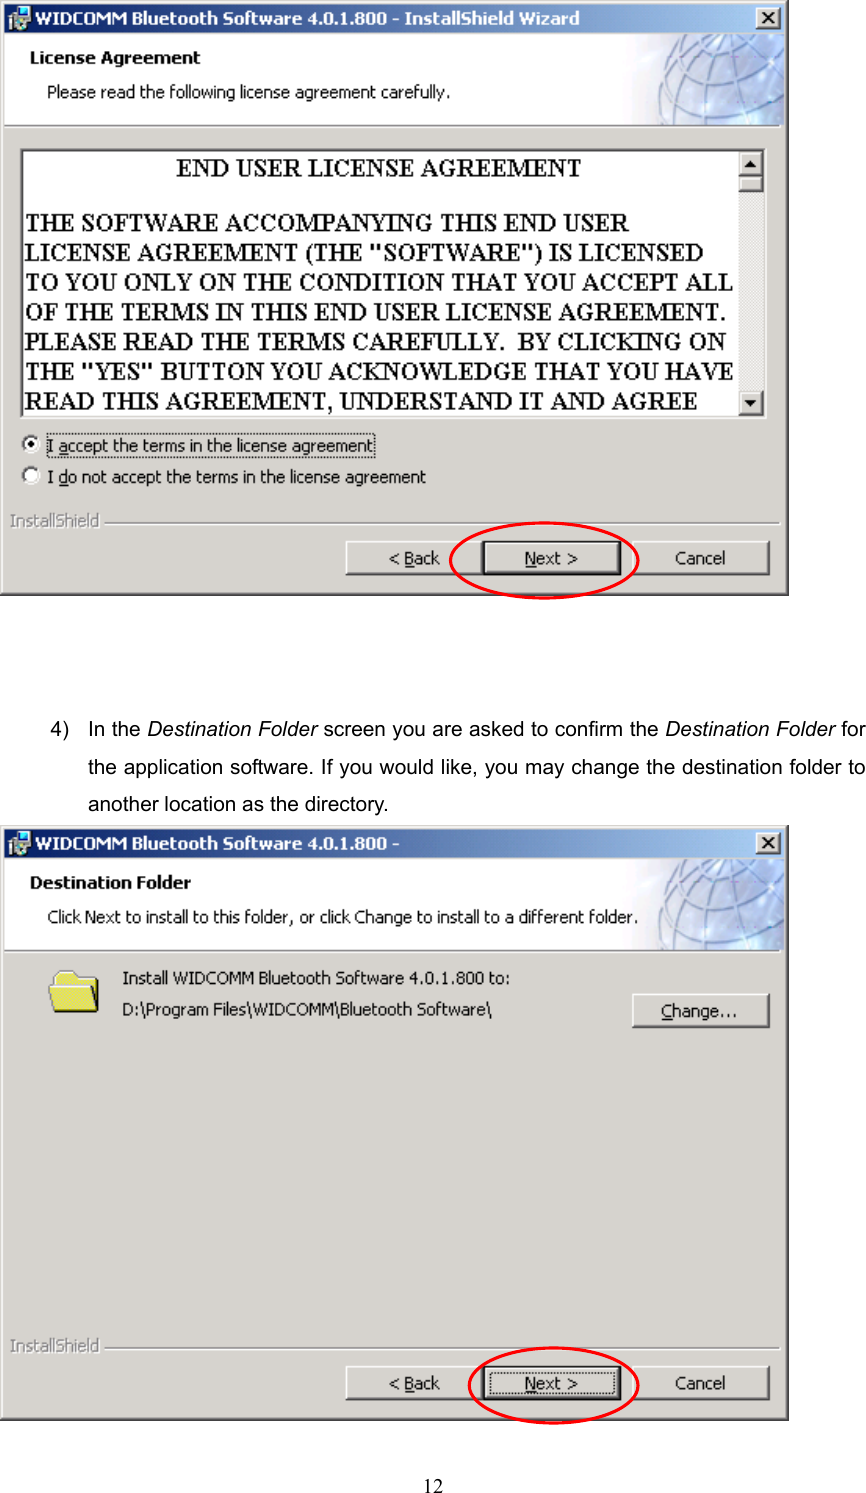  12     4) In the Destination Folder screen you are asked to confirm the Destination Folder for the application software. If you would like, you may change the destination folder to another location as the directory.  